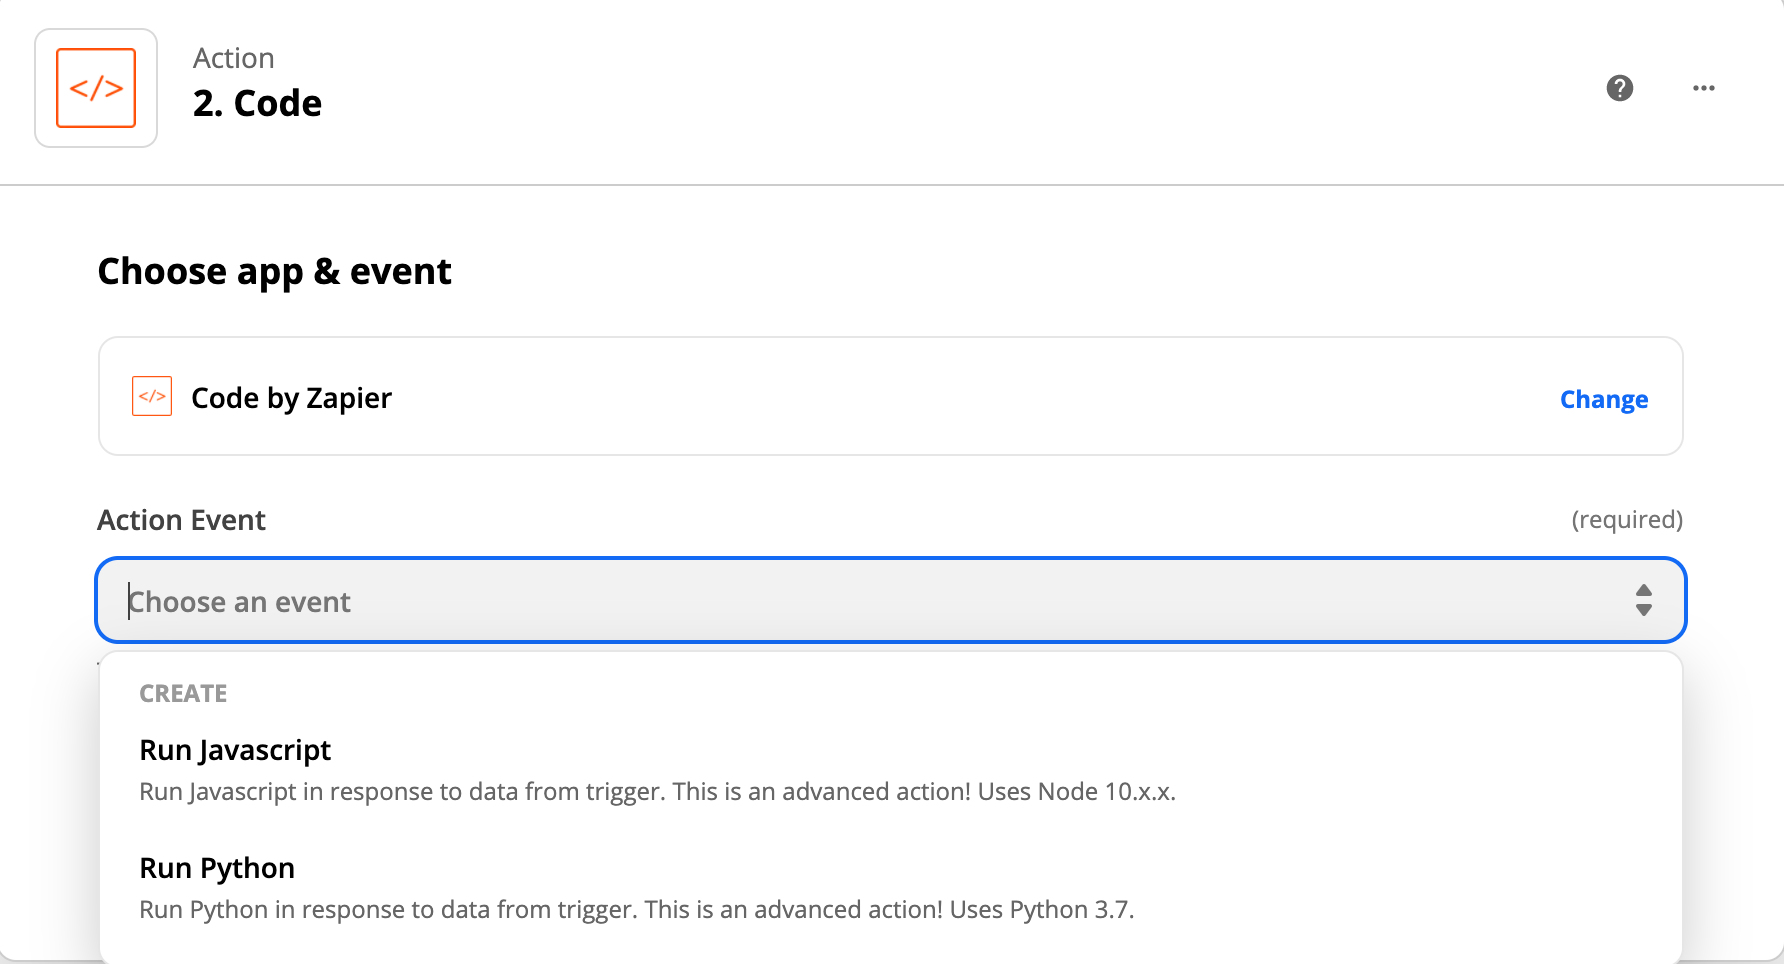 Selecting Run Python from Action Event dropdown in the Zapier code setup menu